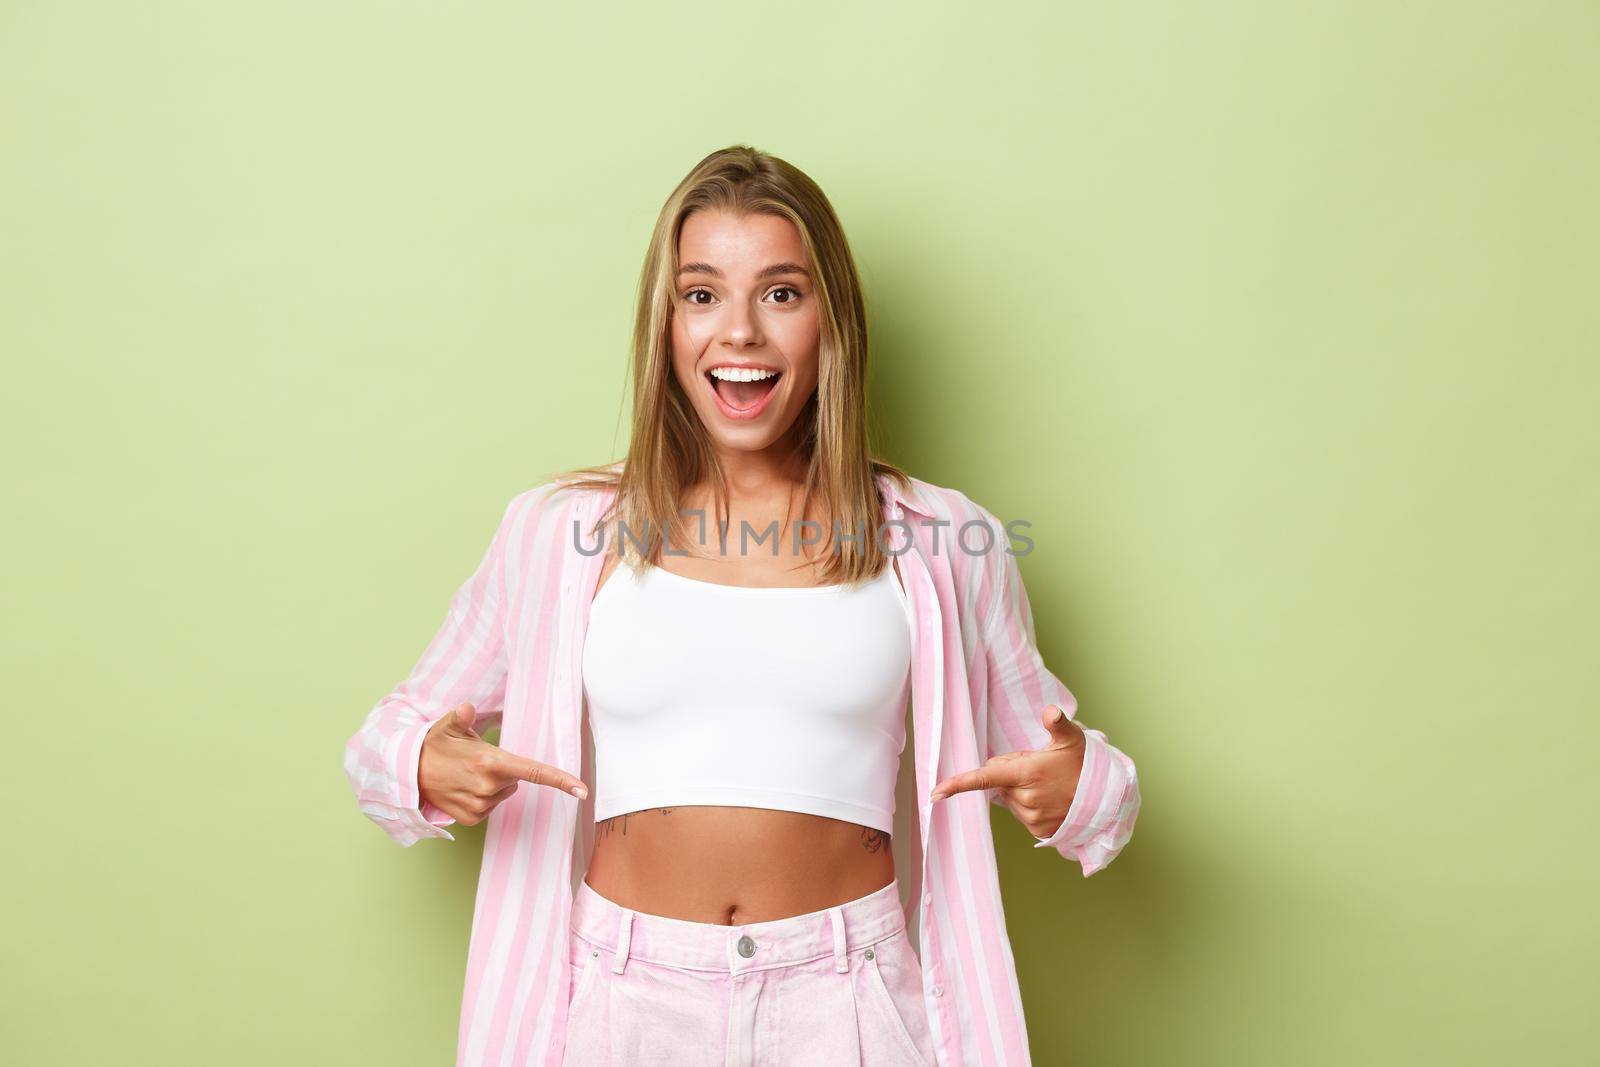 Image of happy blond woman with perfect body and white smile, pointing fingers at her flat belly, showing workout results, standing over green background.